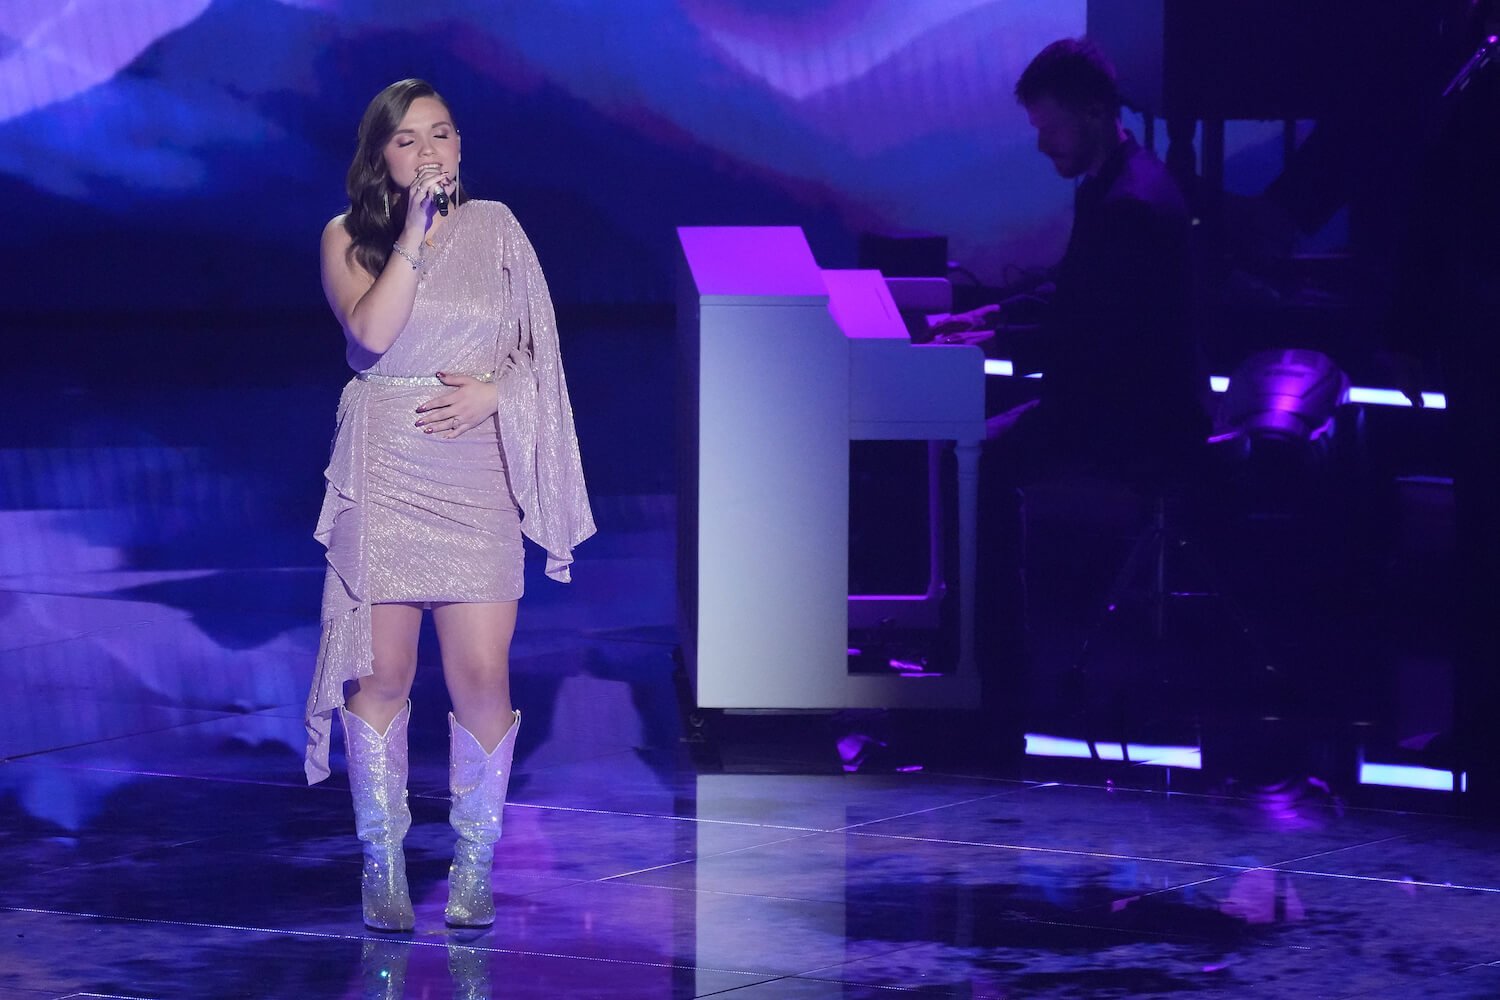 Megan Danielle singing in a dress on the 'American Idol' 2023 stage against a purple background